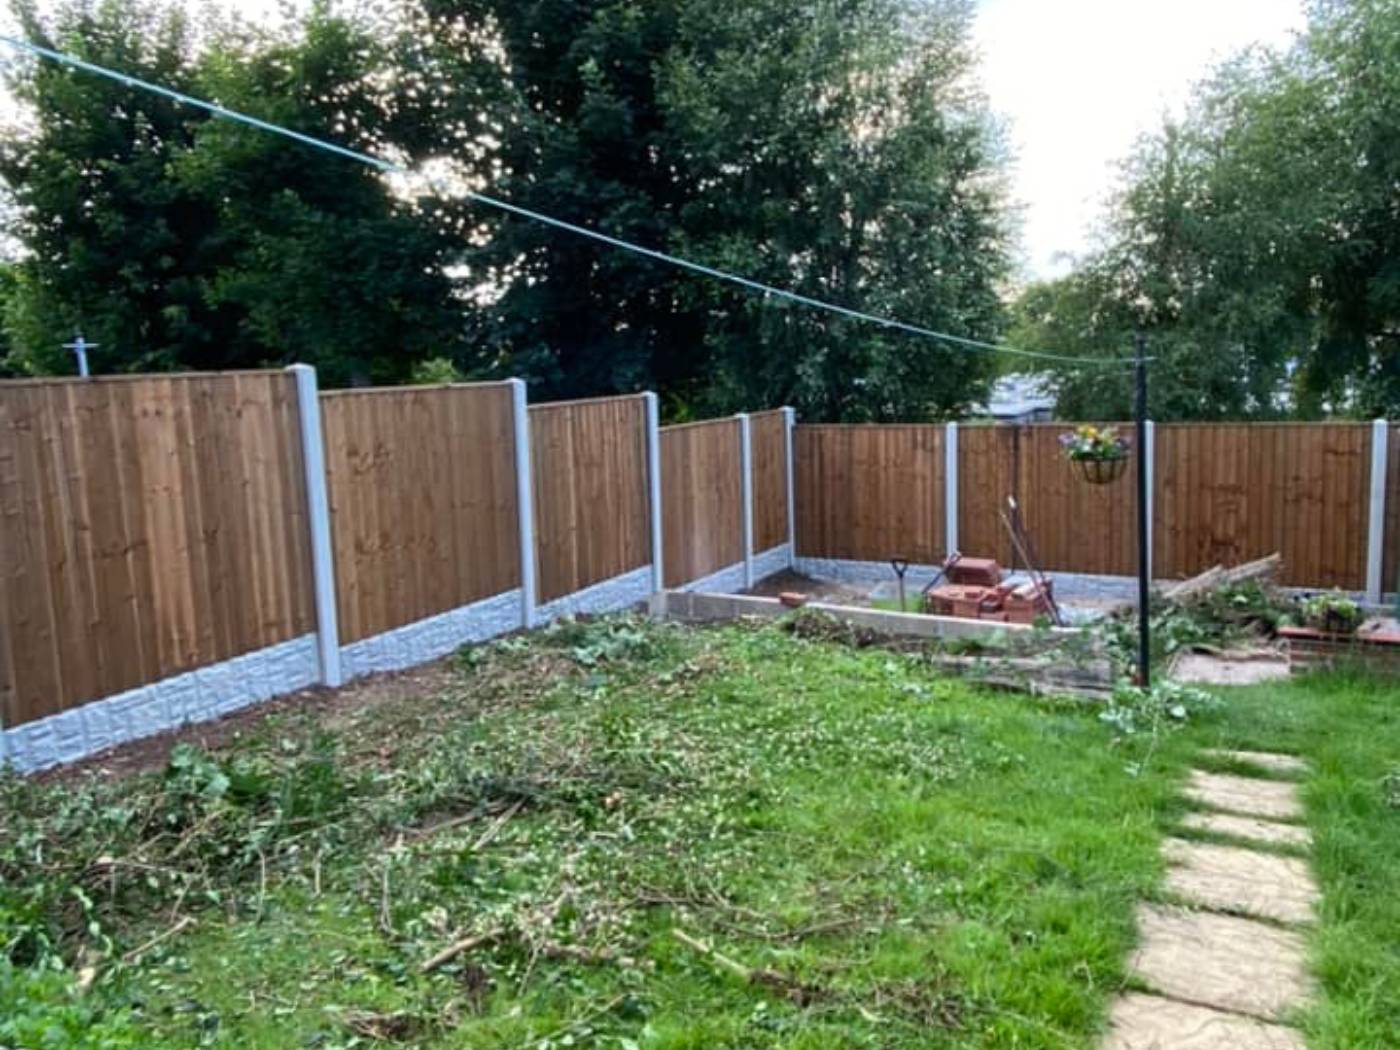 Nottingham Fencing removed the hedge